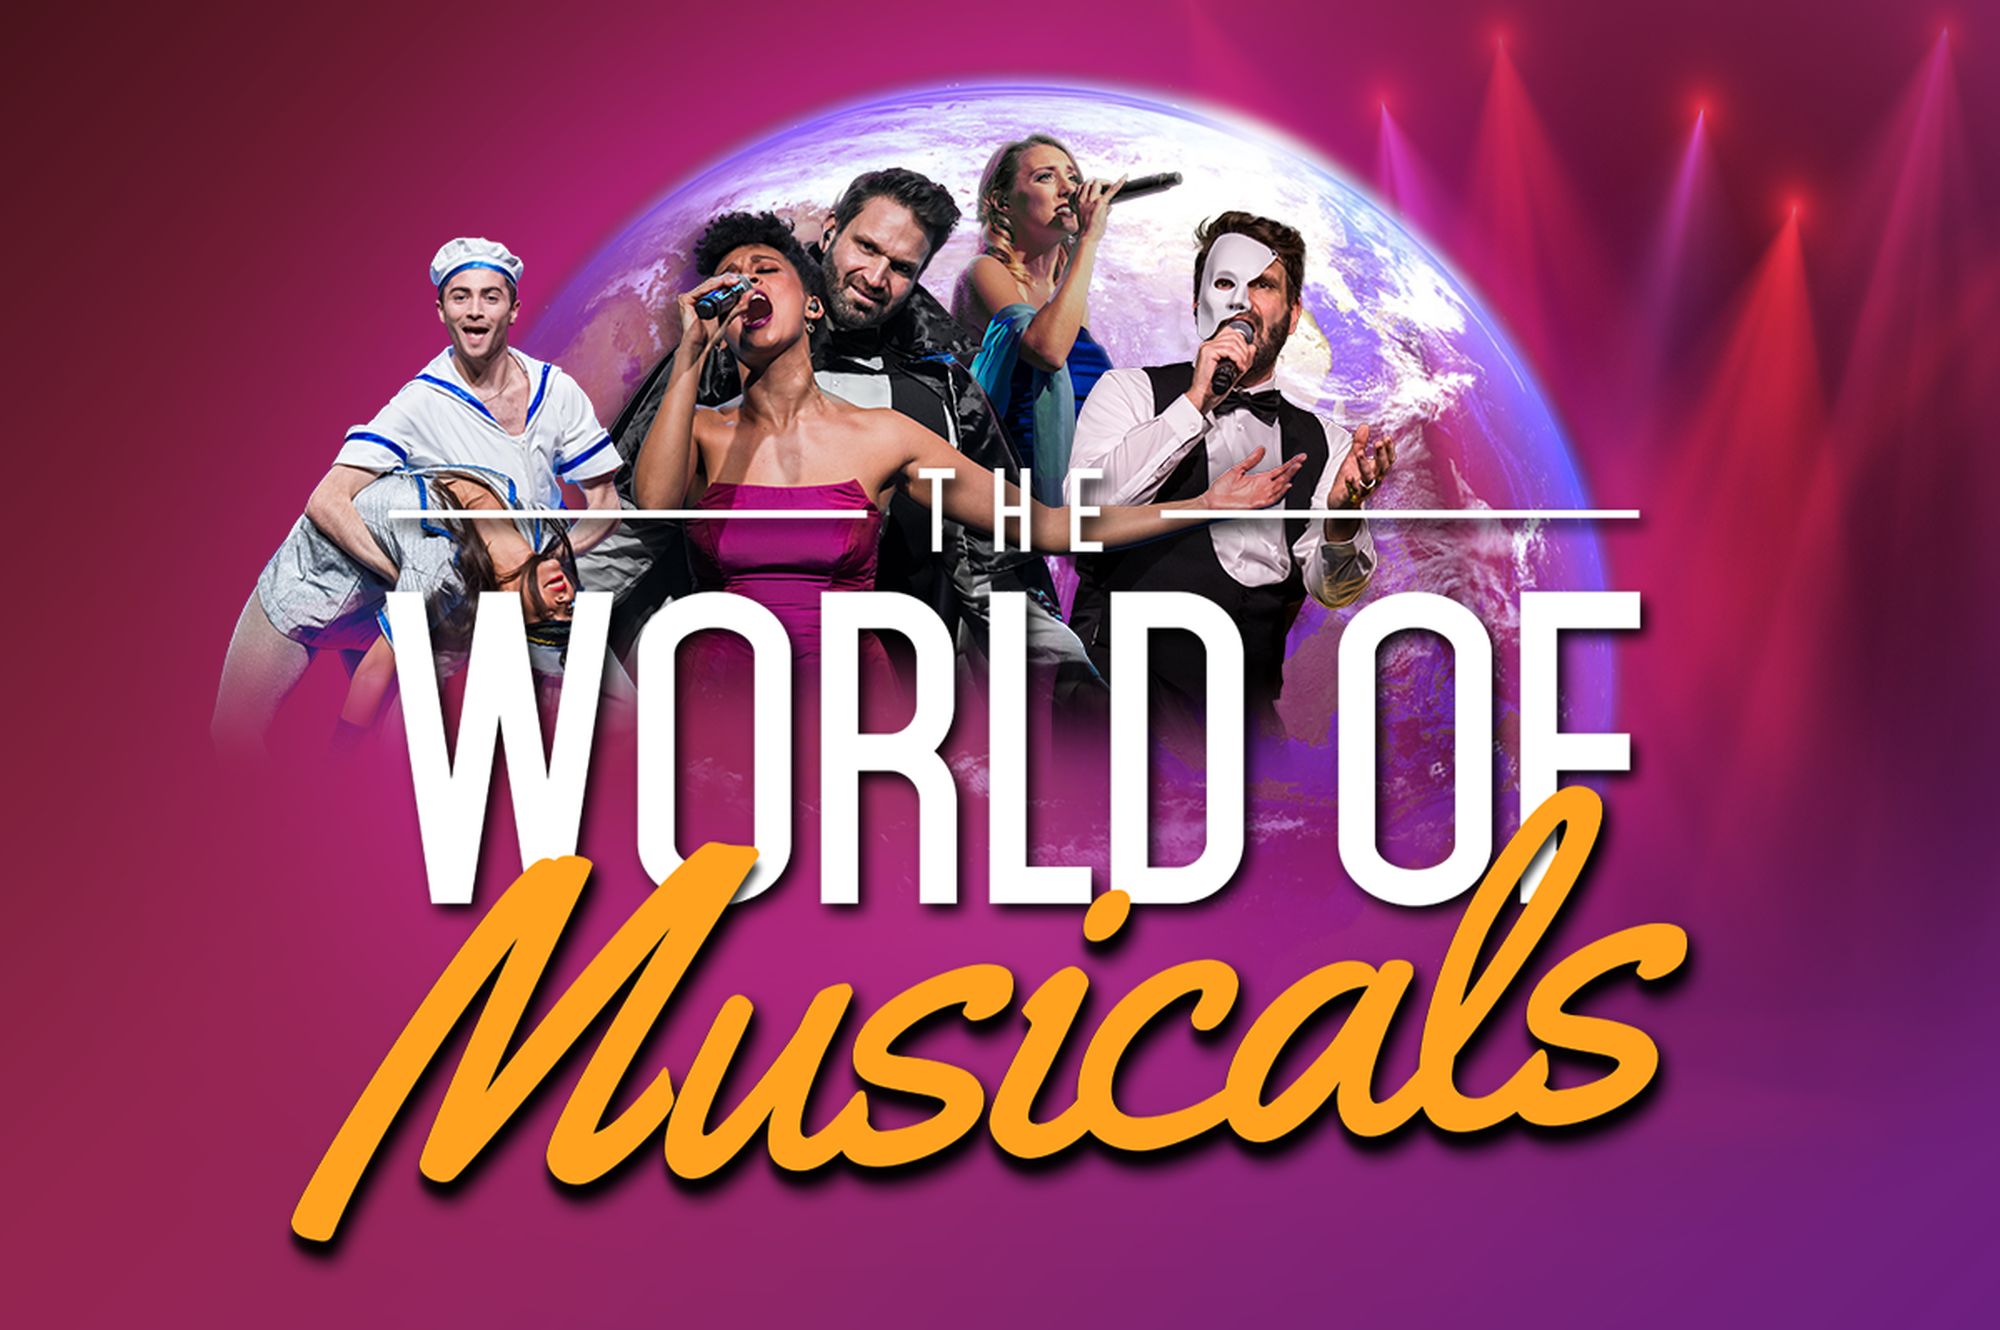 THE WORLD OF MUSICALS - The Very Best of Musicals